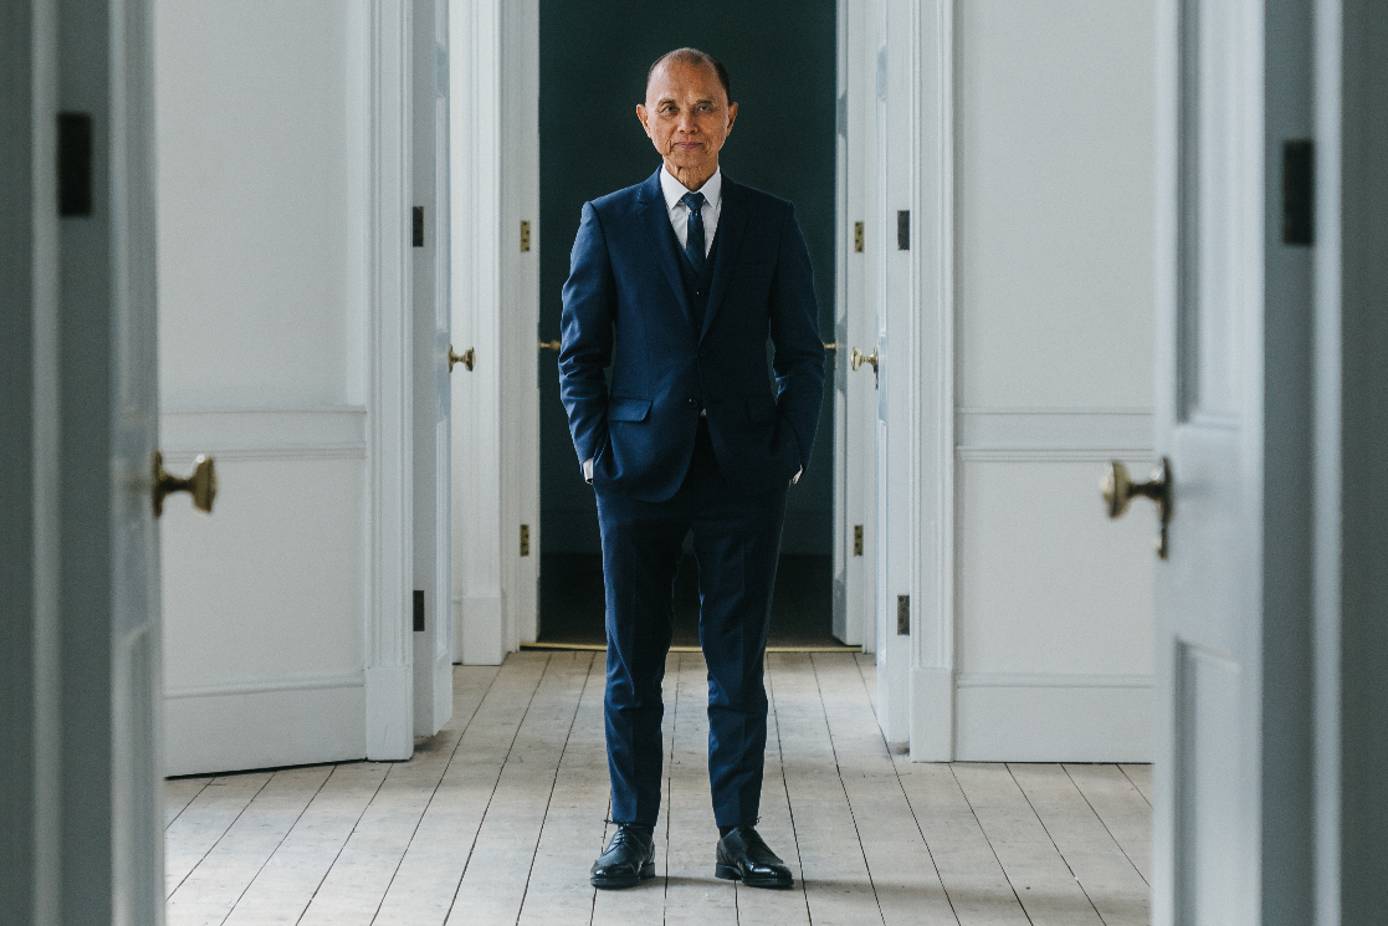 Designer Jimmy Choo launches new fashion academy in London